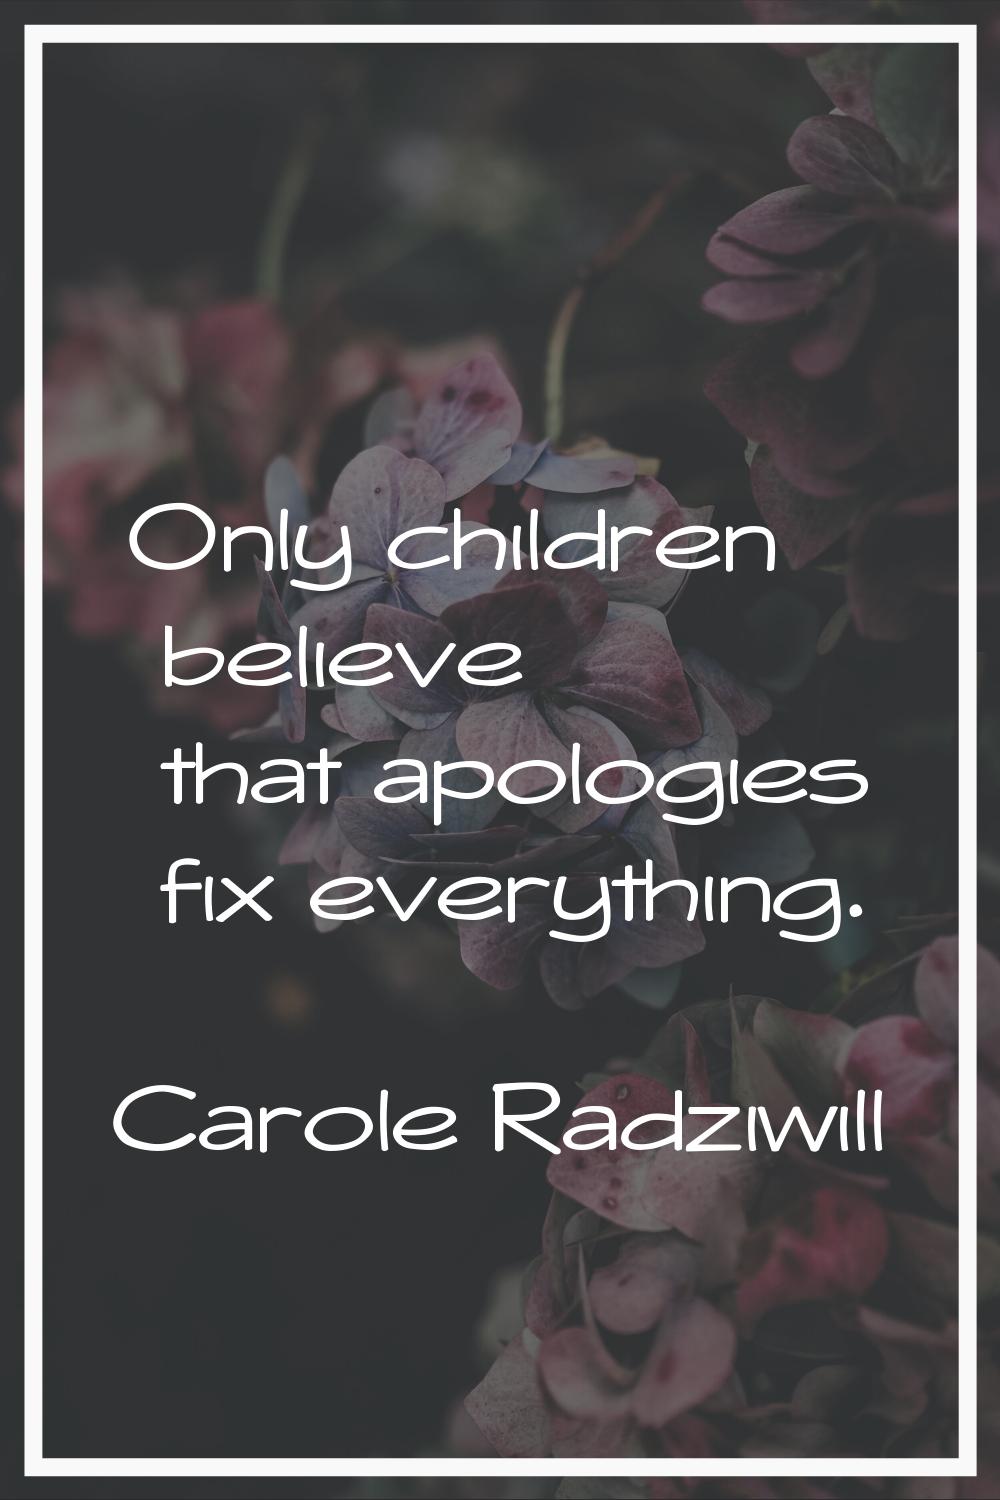 Only children believe that apologies fix everything.